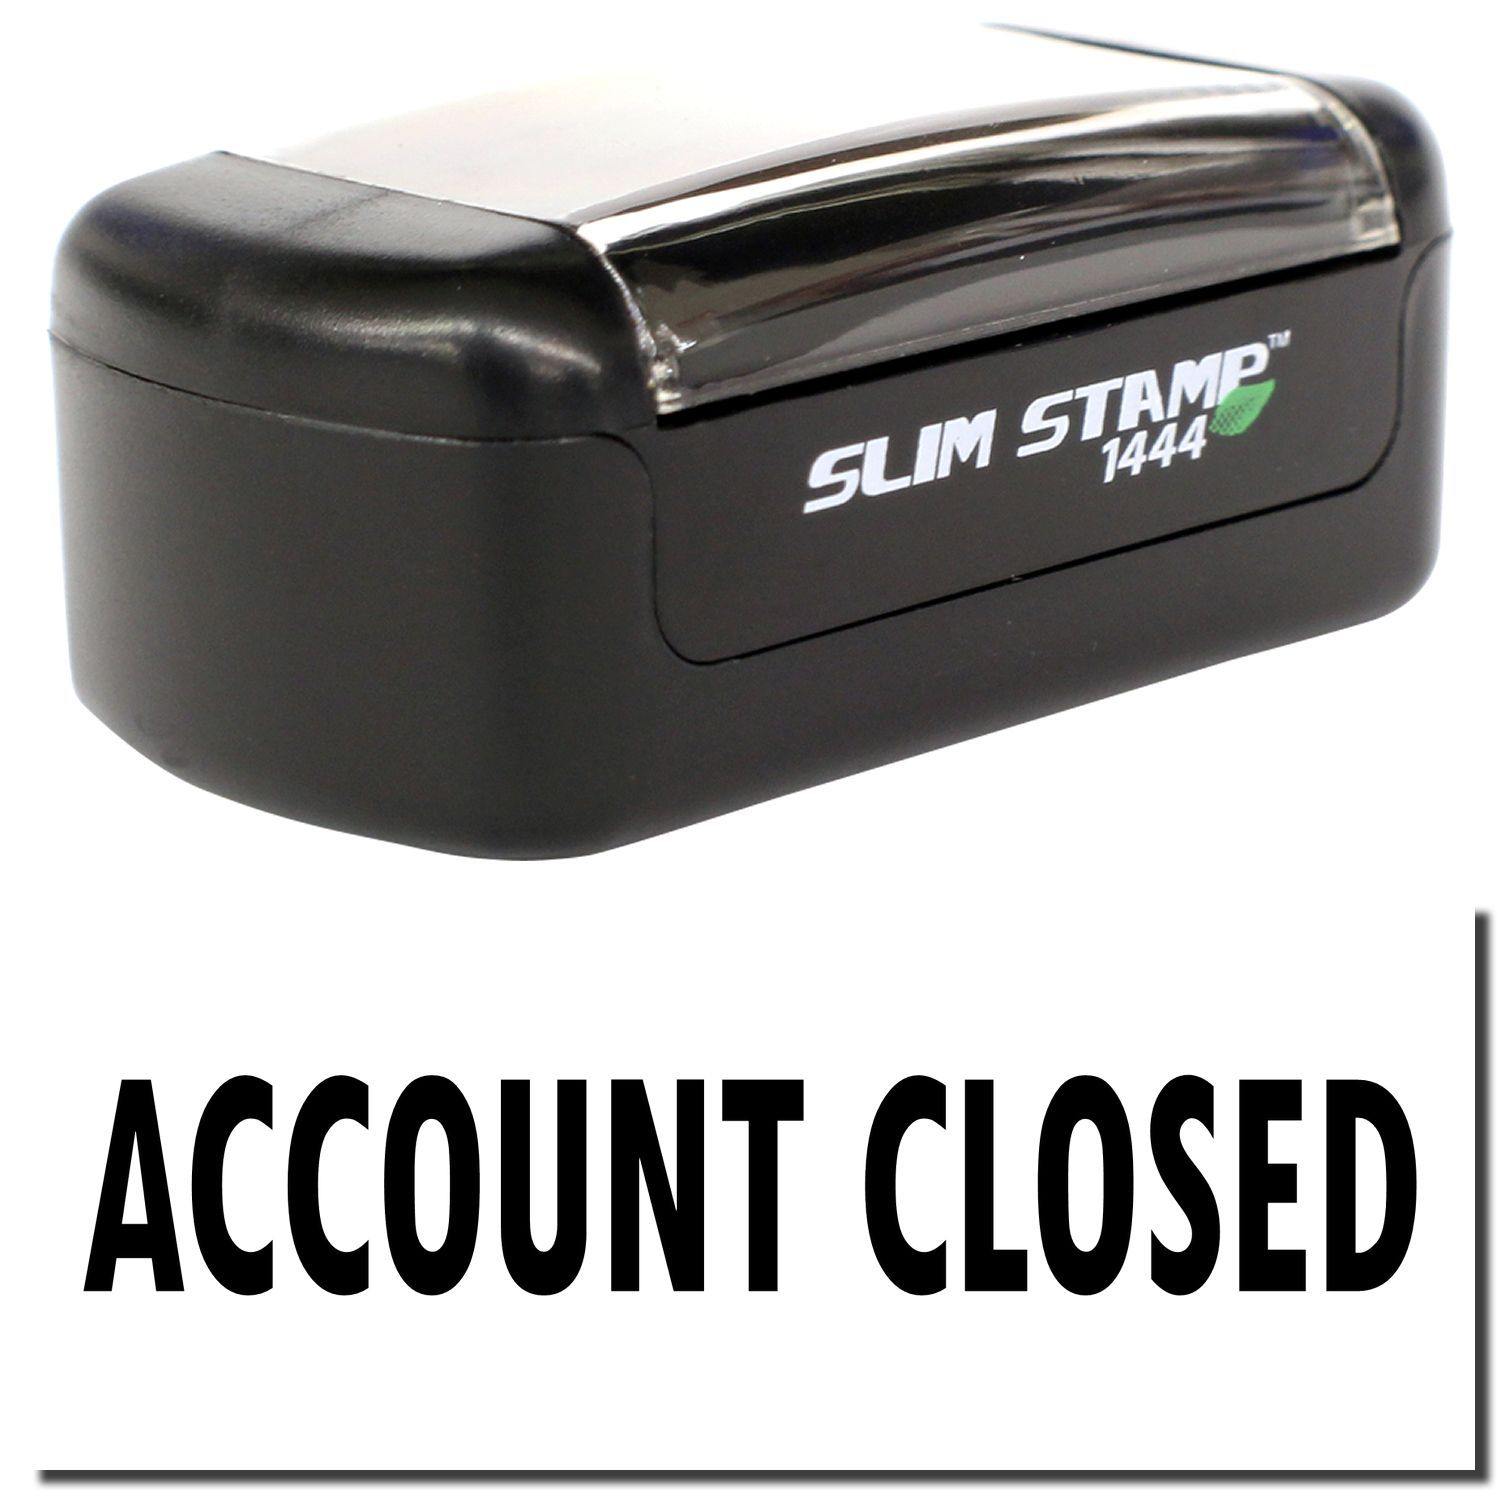 A stock office pre-inked stamp with a stamped image showing how the text "ACCOUNT CLOSED" is displayed after stamping.